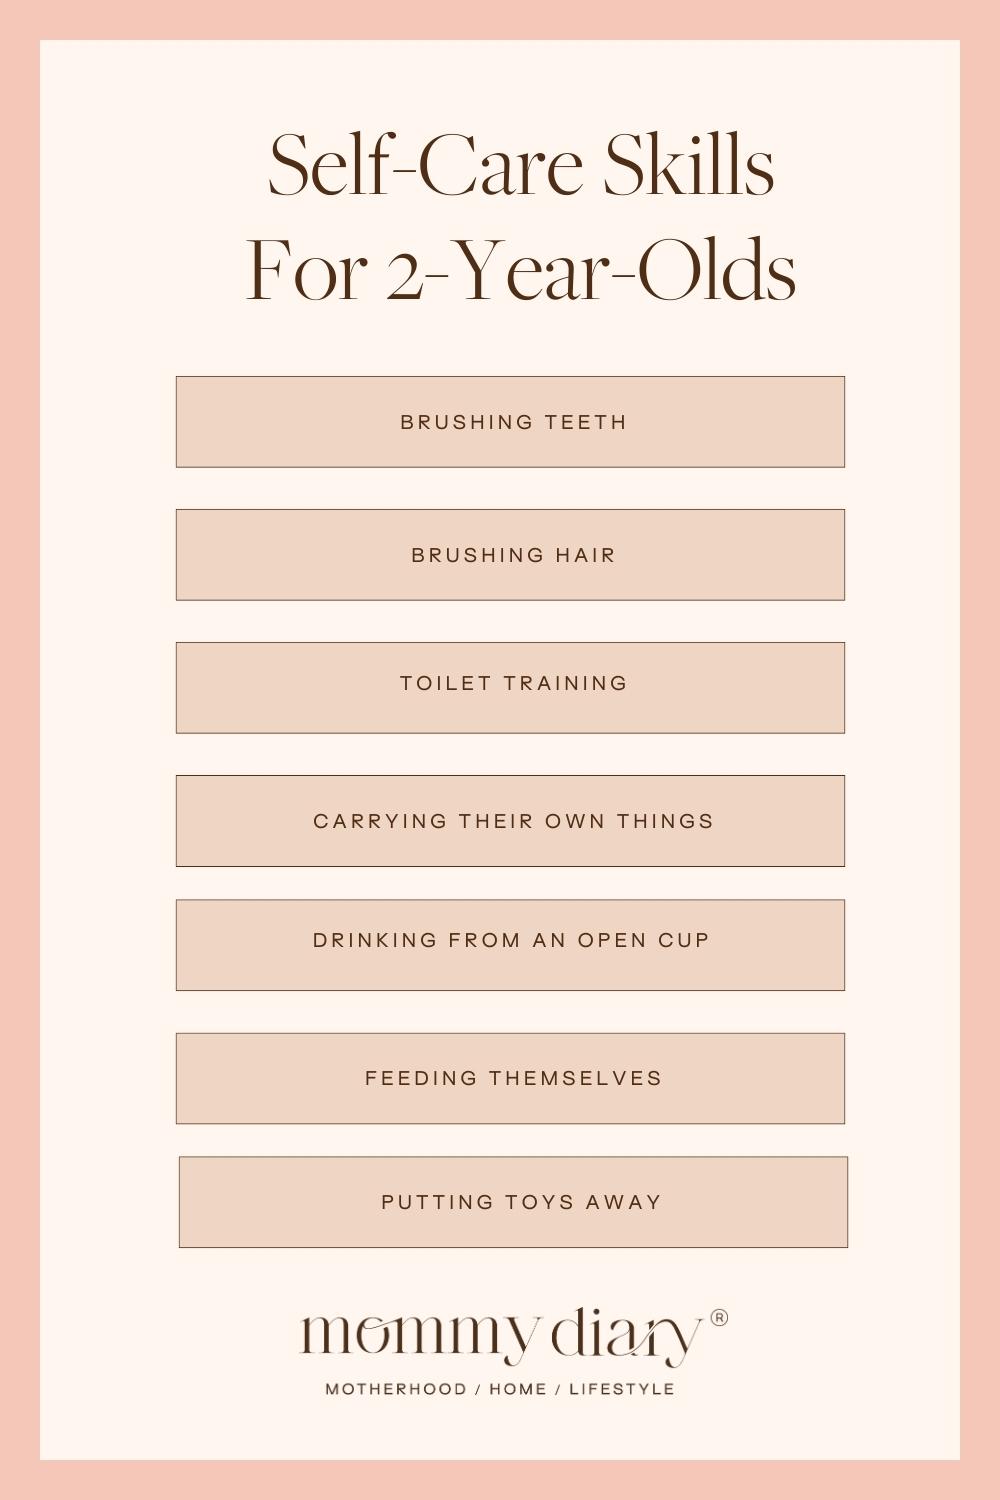 Self-Care Skills For 2-Year Olds